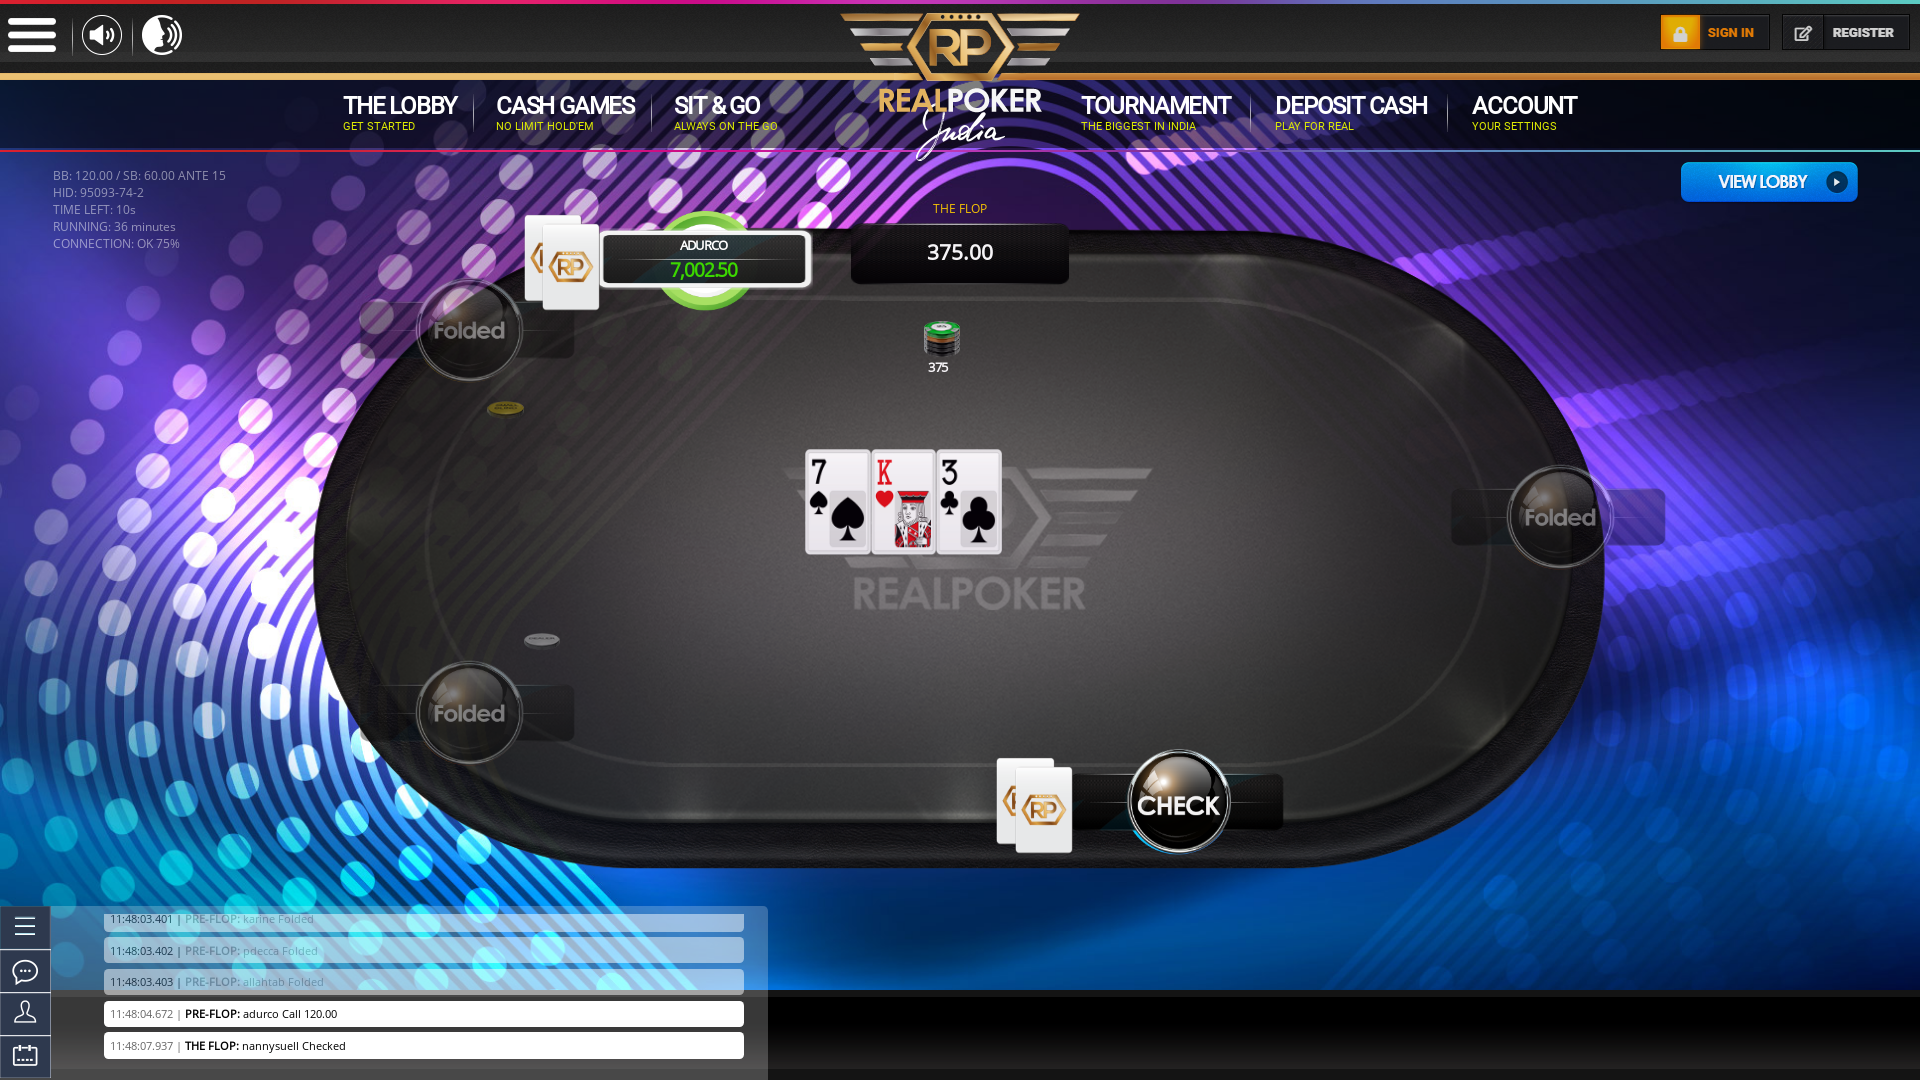 Bardez real poker on a 10 player table in the 36th minute of the game